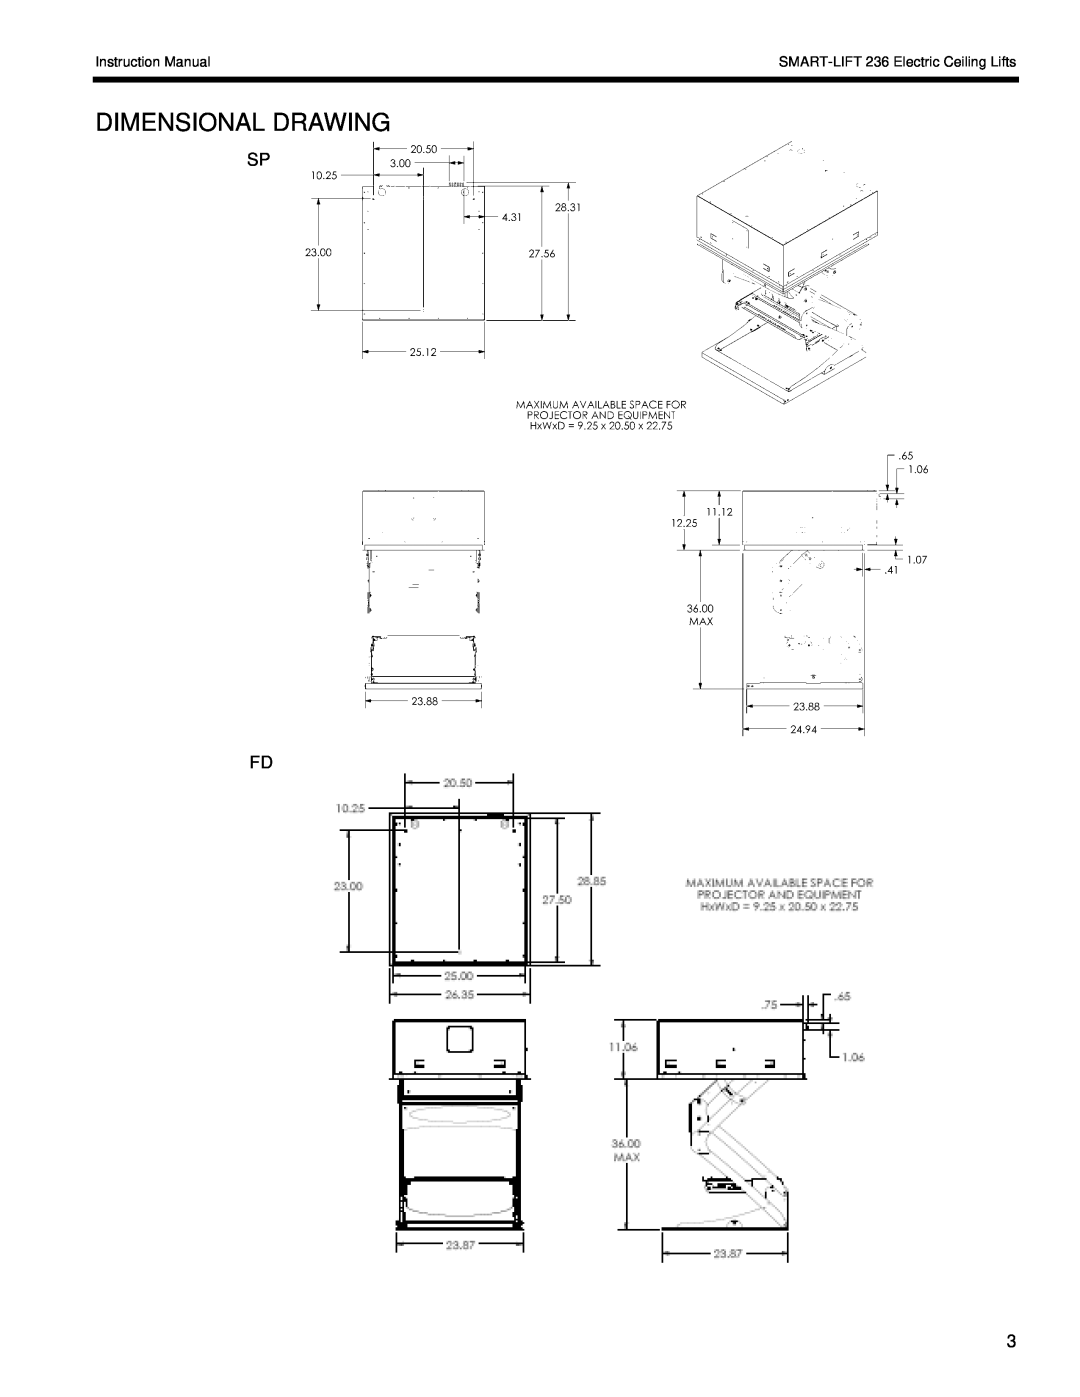 Chief Manufacturing SL-236 Dimensional Drawing, Sp Fd, Instruction Manual, SMART-LIFT 236 Electric Ceiling Lifts 